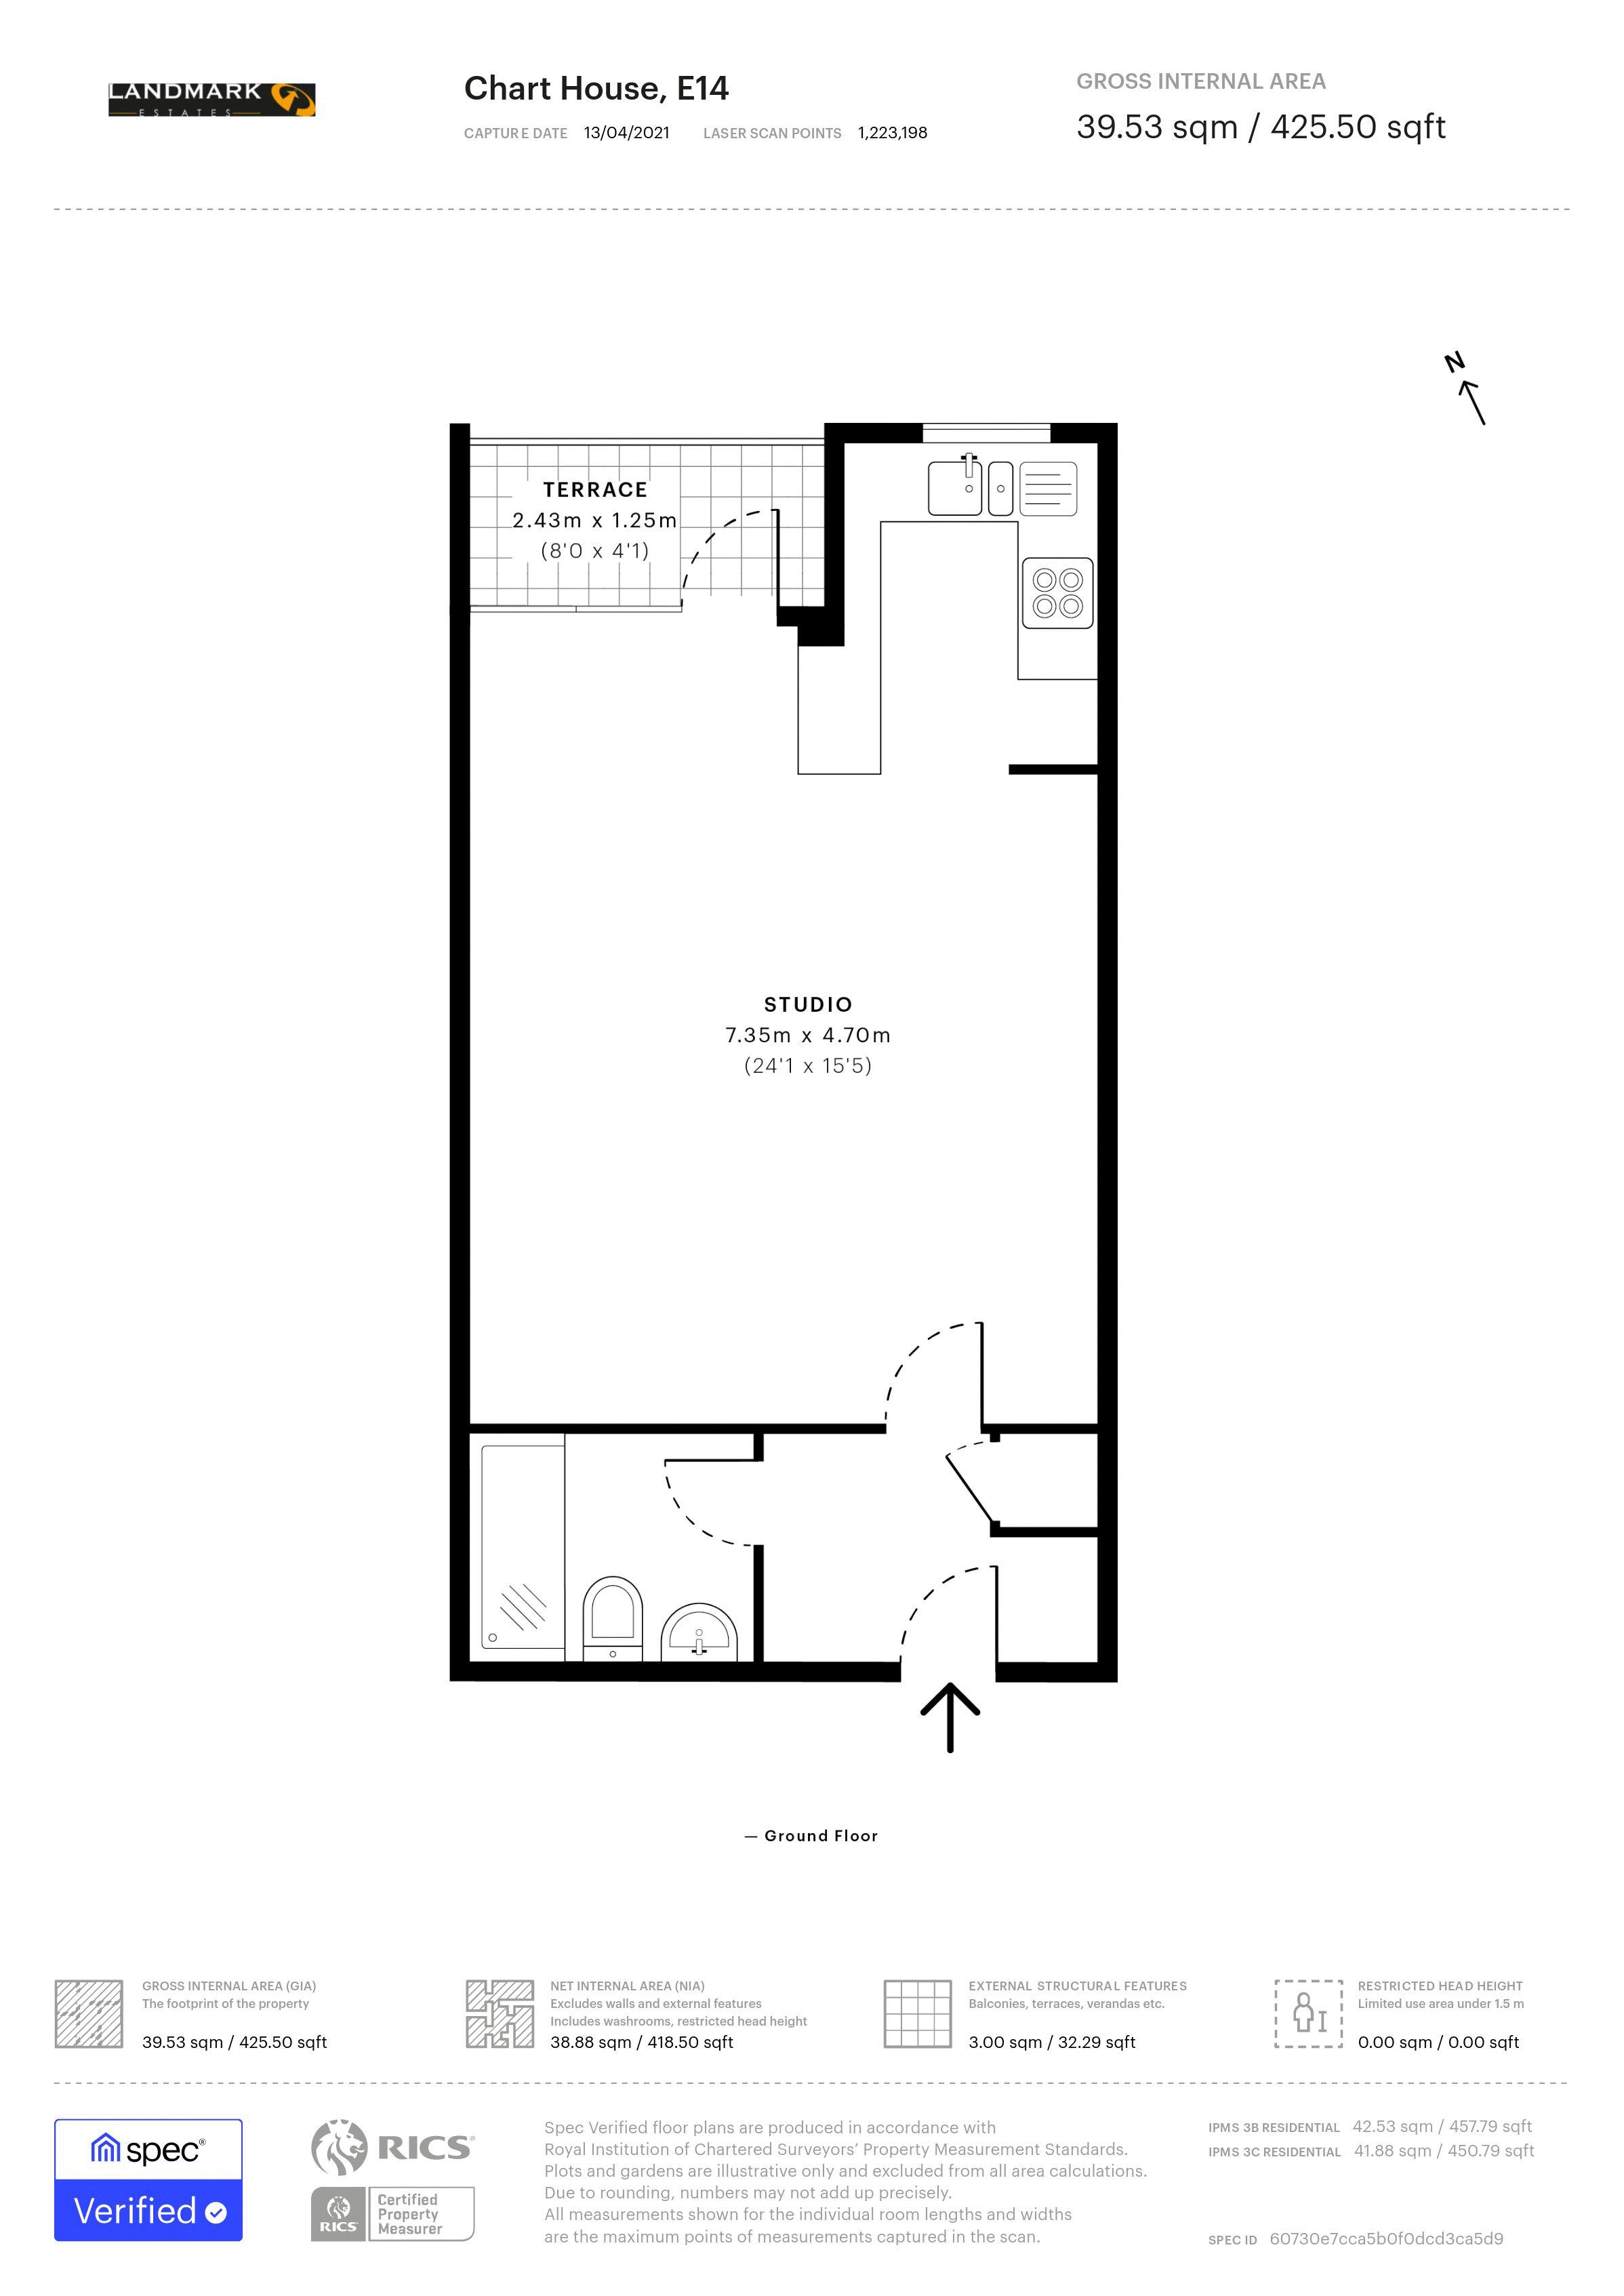 For sale in Chart House, London - Property Floorplan